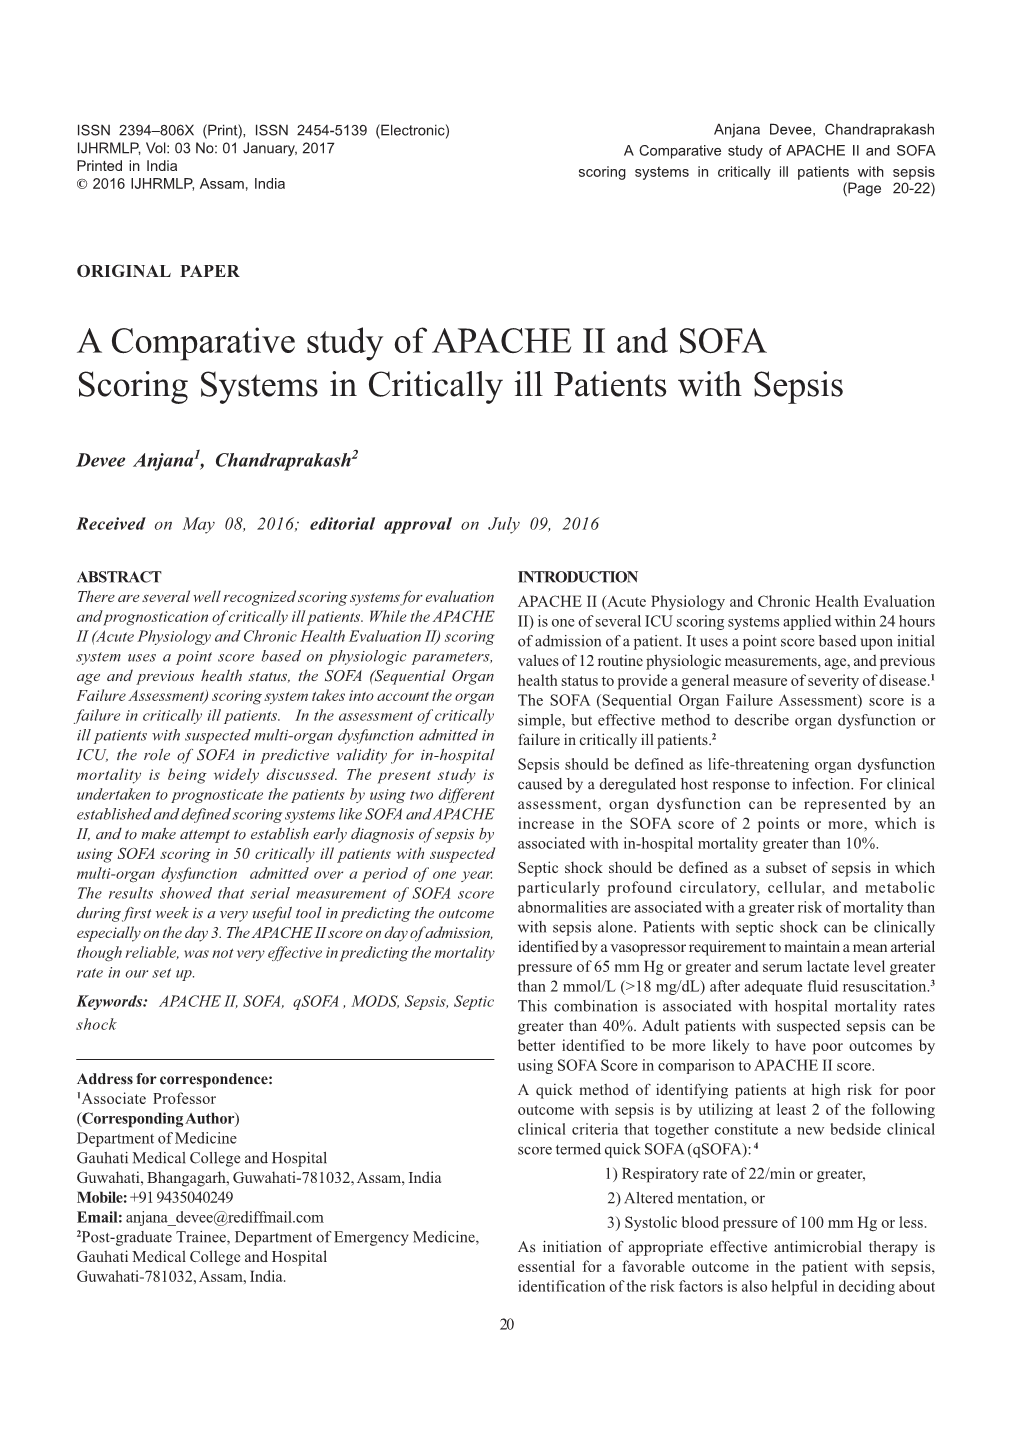 A Comparative Study of APACHE II and SOFA Scoring Systems in Critically Ill Patients with Sepsis